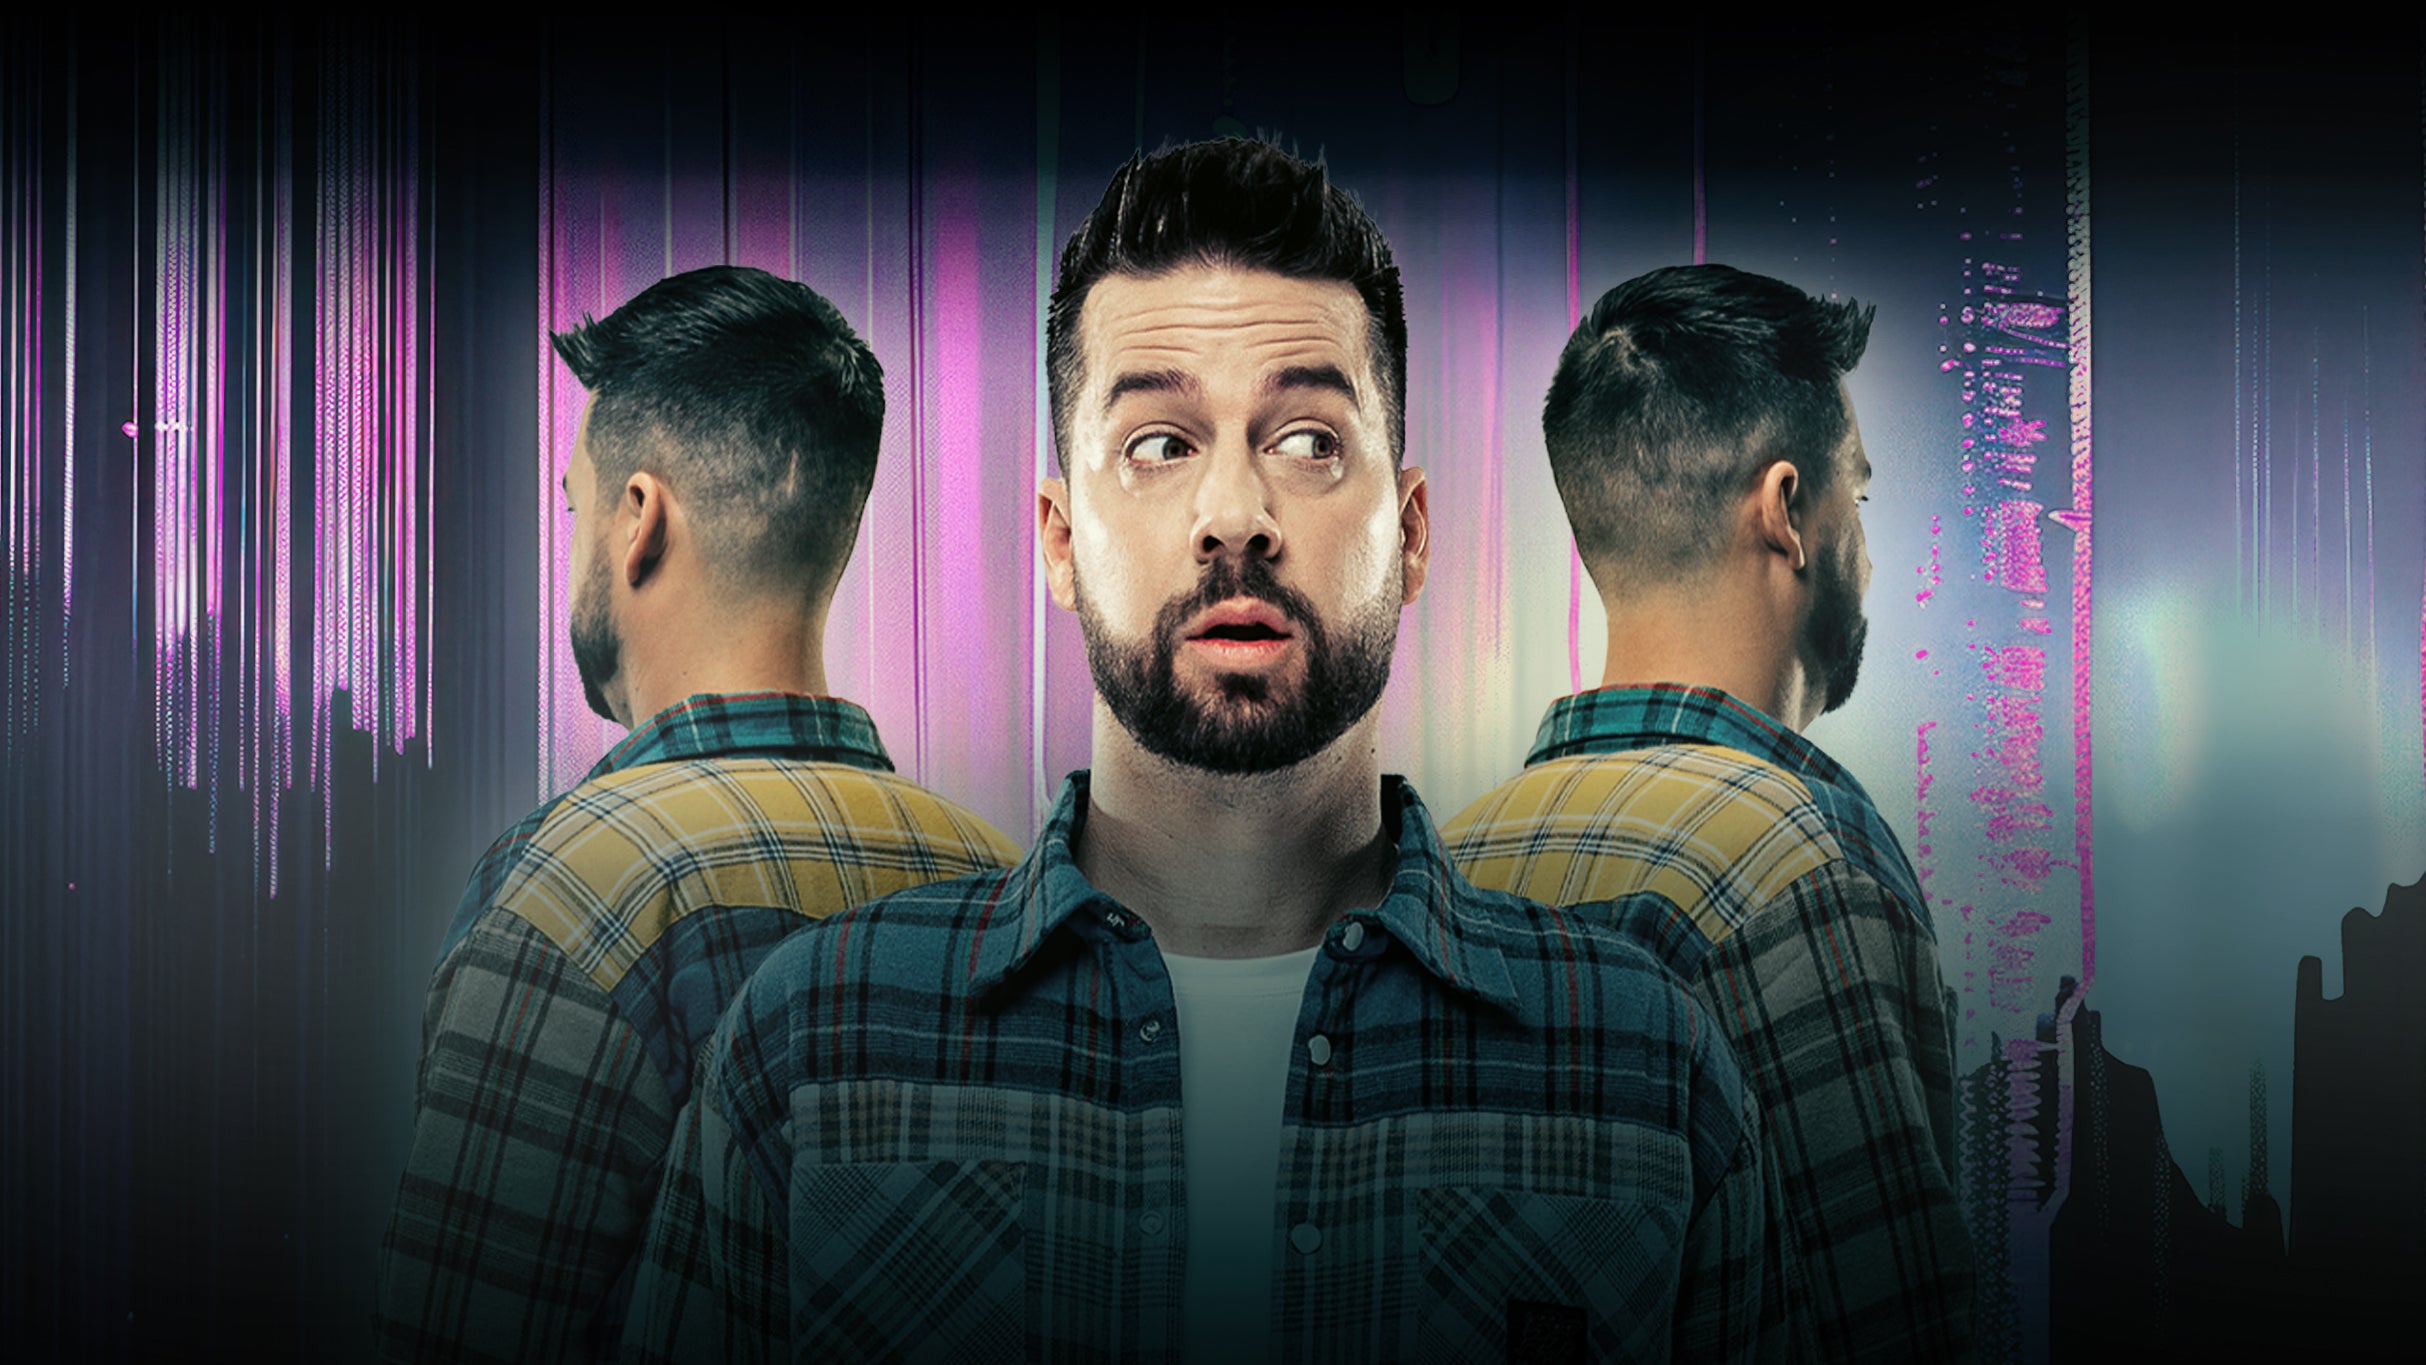 John Crist: Special Taping in Duluth promo photo for Artist presale offer code